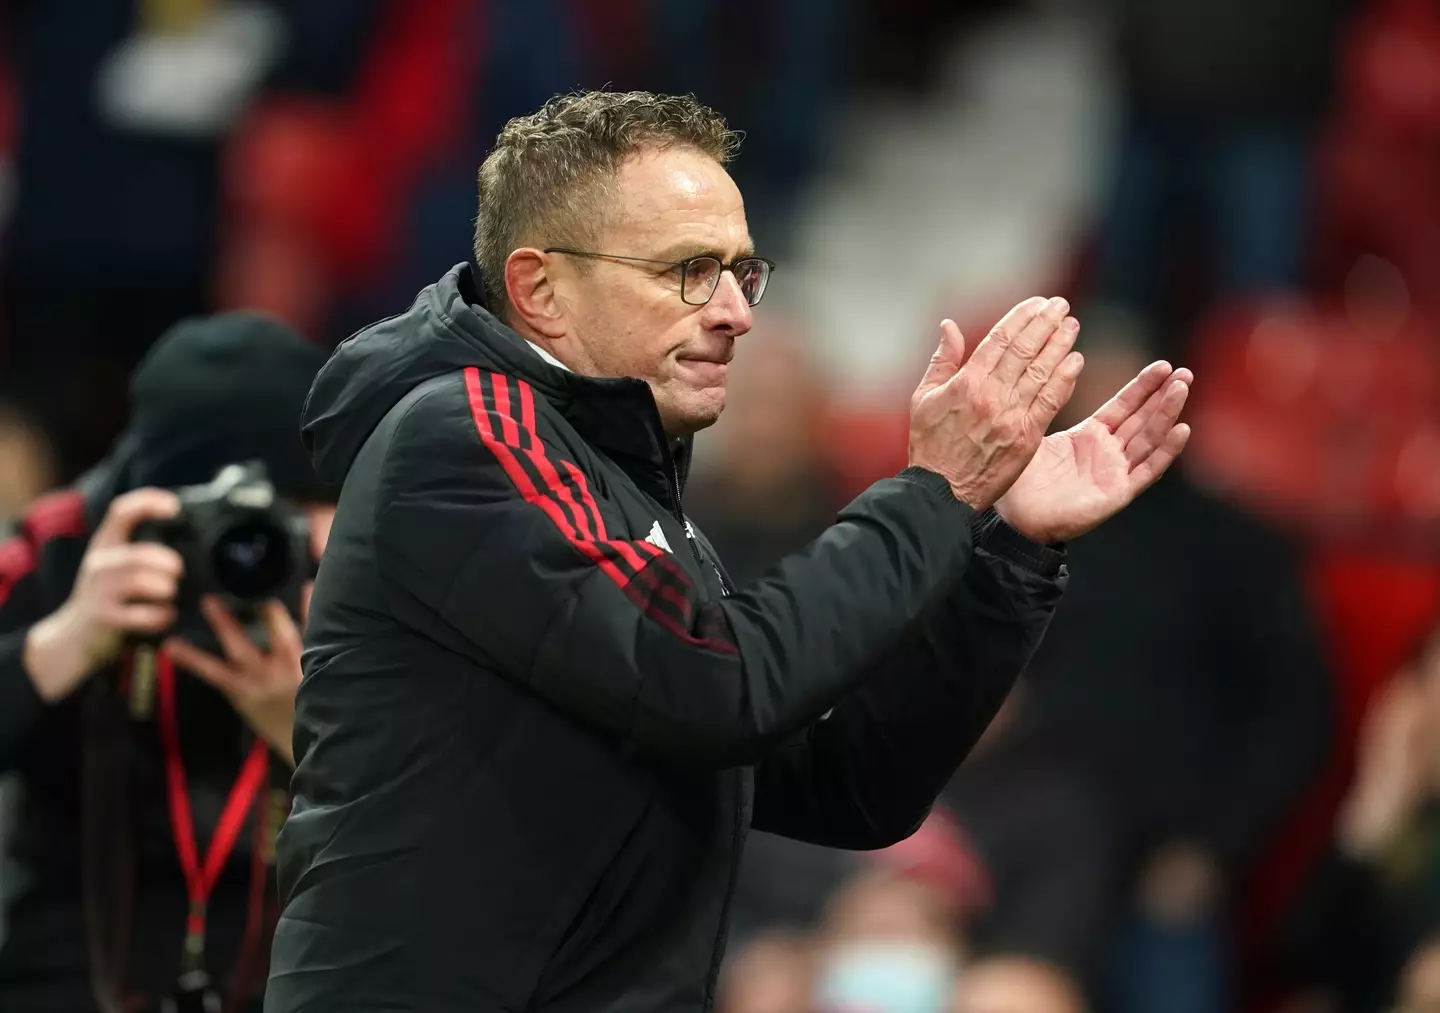 Rangnick took charge of his second match as United interim manager on Wednesday (Image credit: PA)